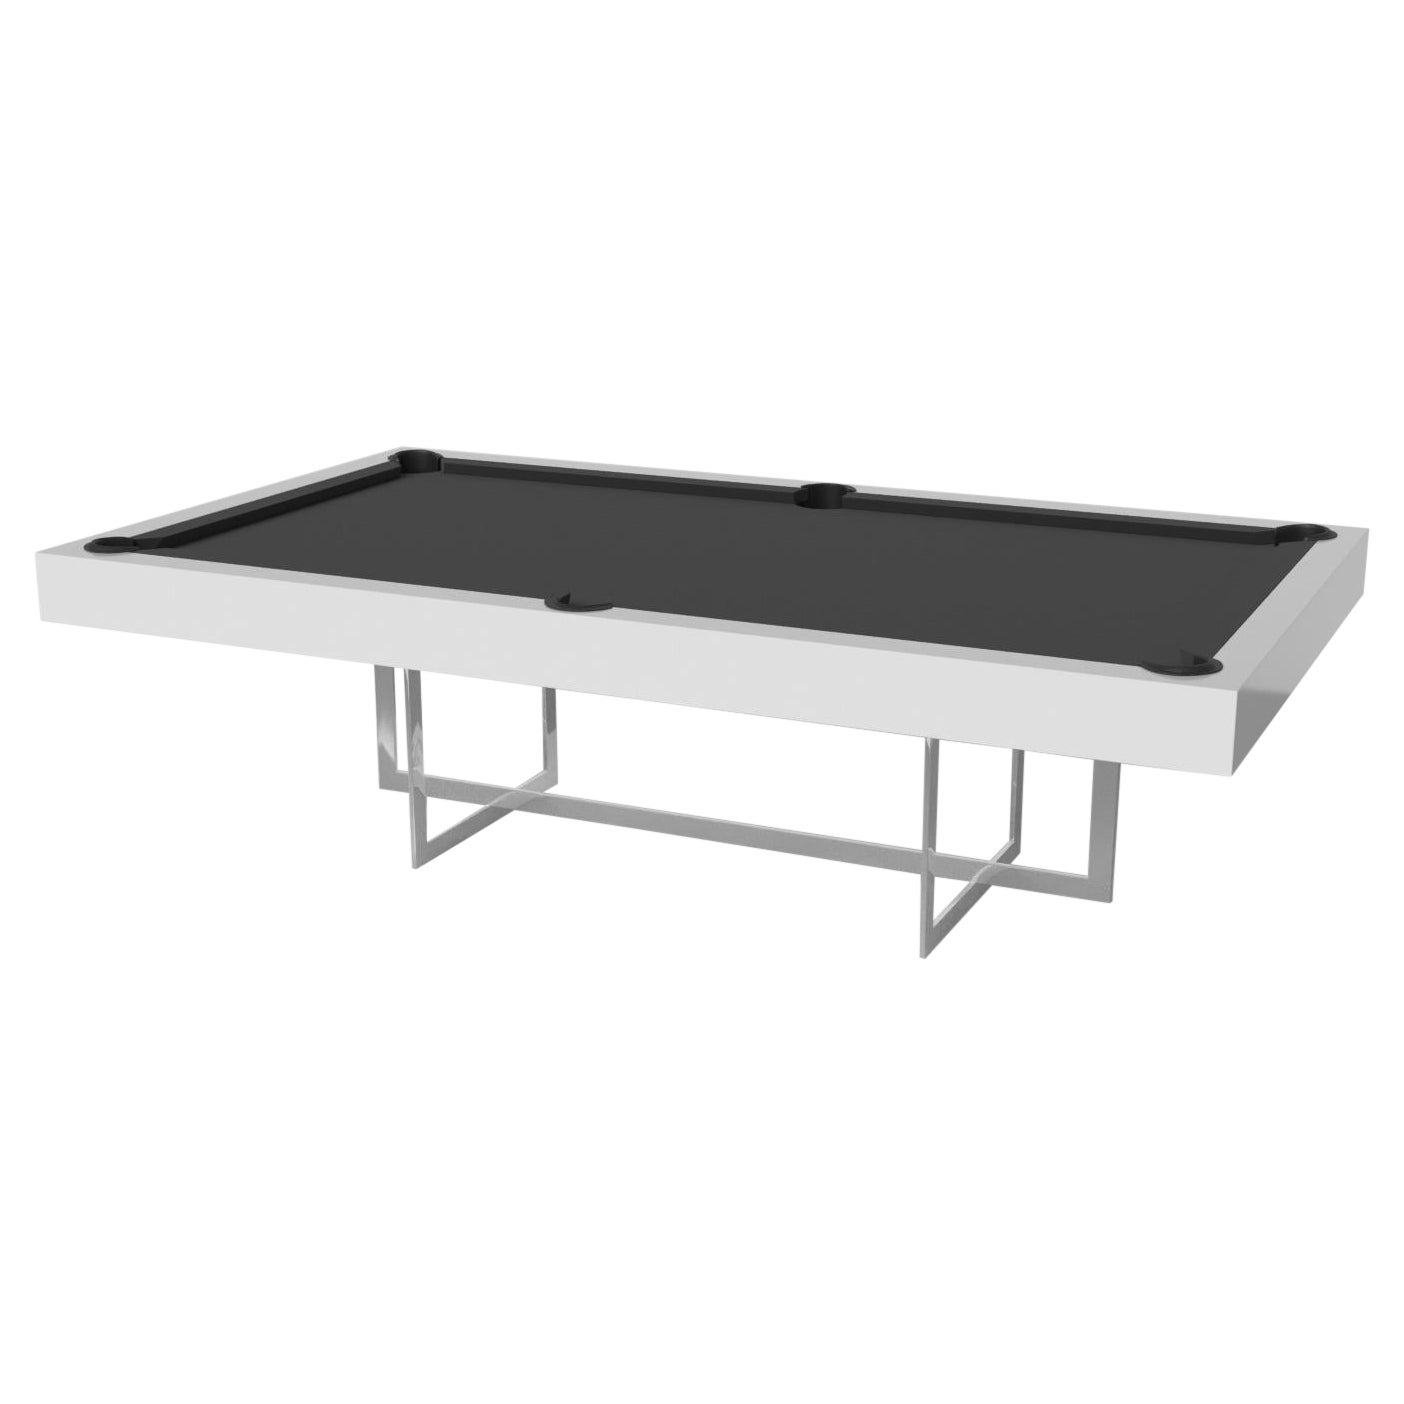 Elevate Customs Beso Pool Table / Solid Pantone White Color in 8.5' -Made in USA For Sale